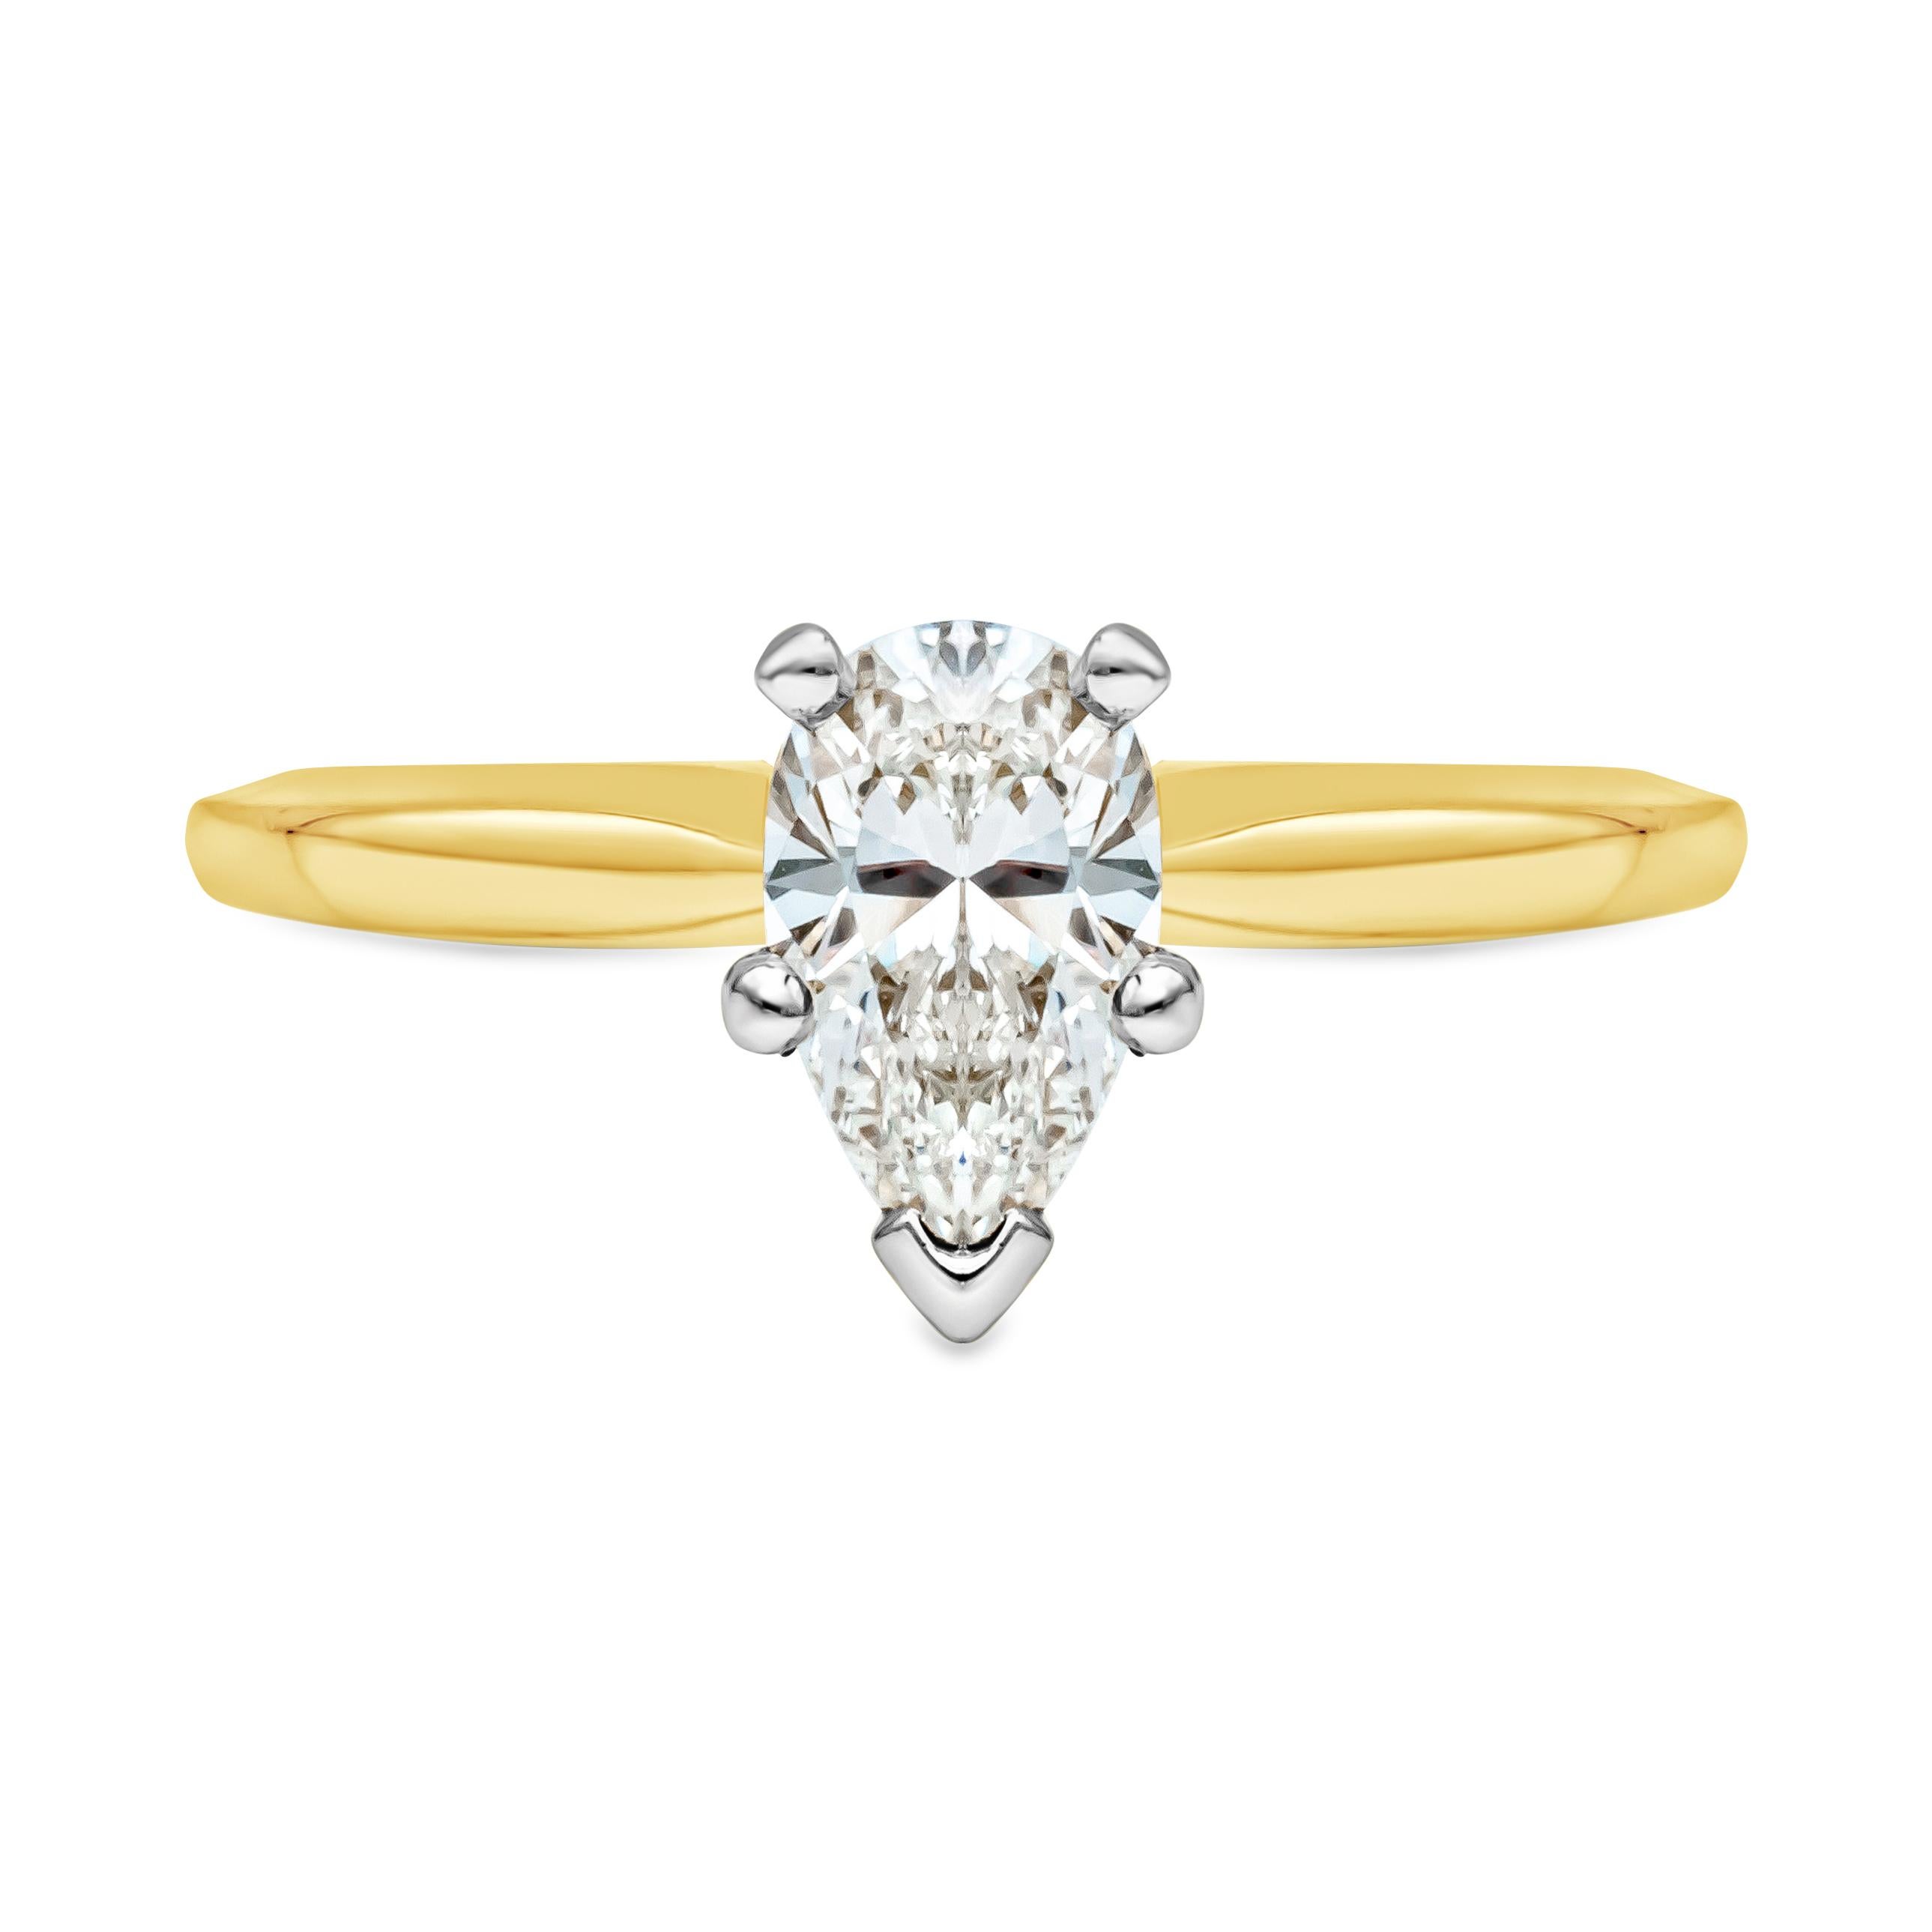 A classic and simple engagement ring design showcasing a single 0.71 carat pear shape diamond center, set in a five prong basket setting. Finished with a chic knife-edge design in 14K yellow gold. Size 5.75 US resizable upon request.

Roman Malakov